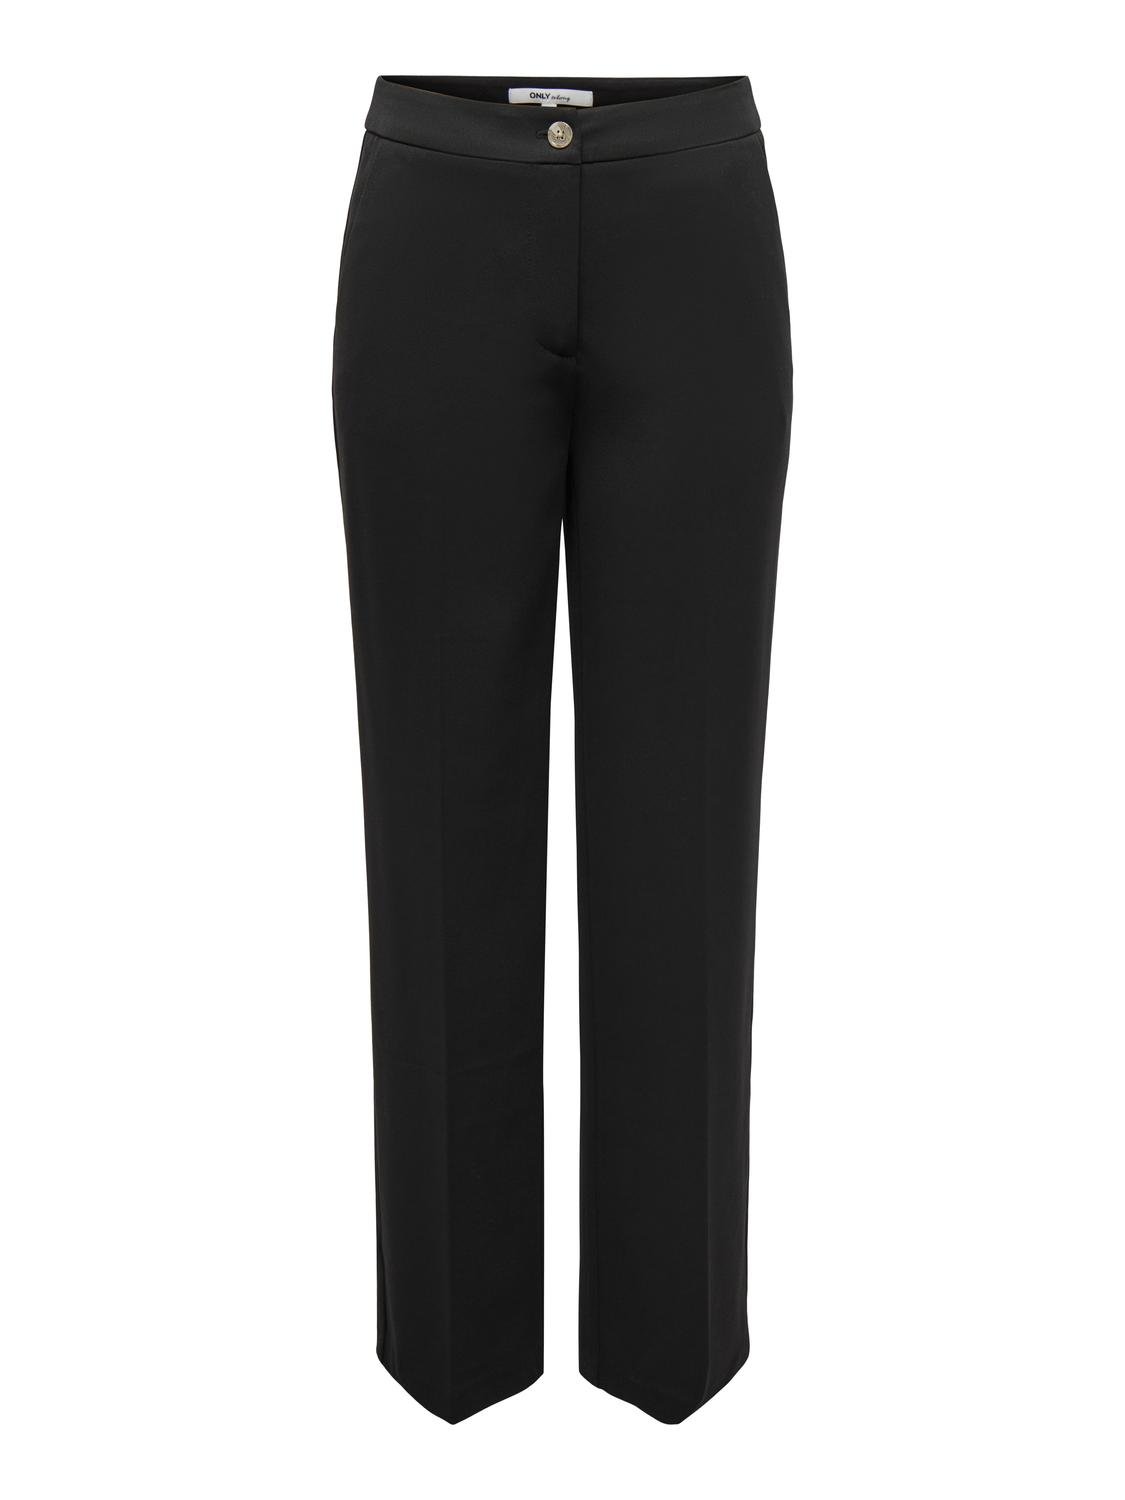 ONLY Basic trousers with high waist -Black - 15298576